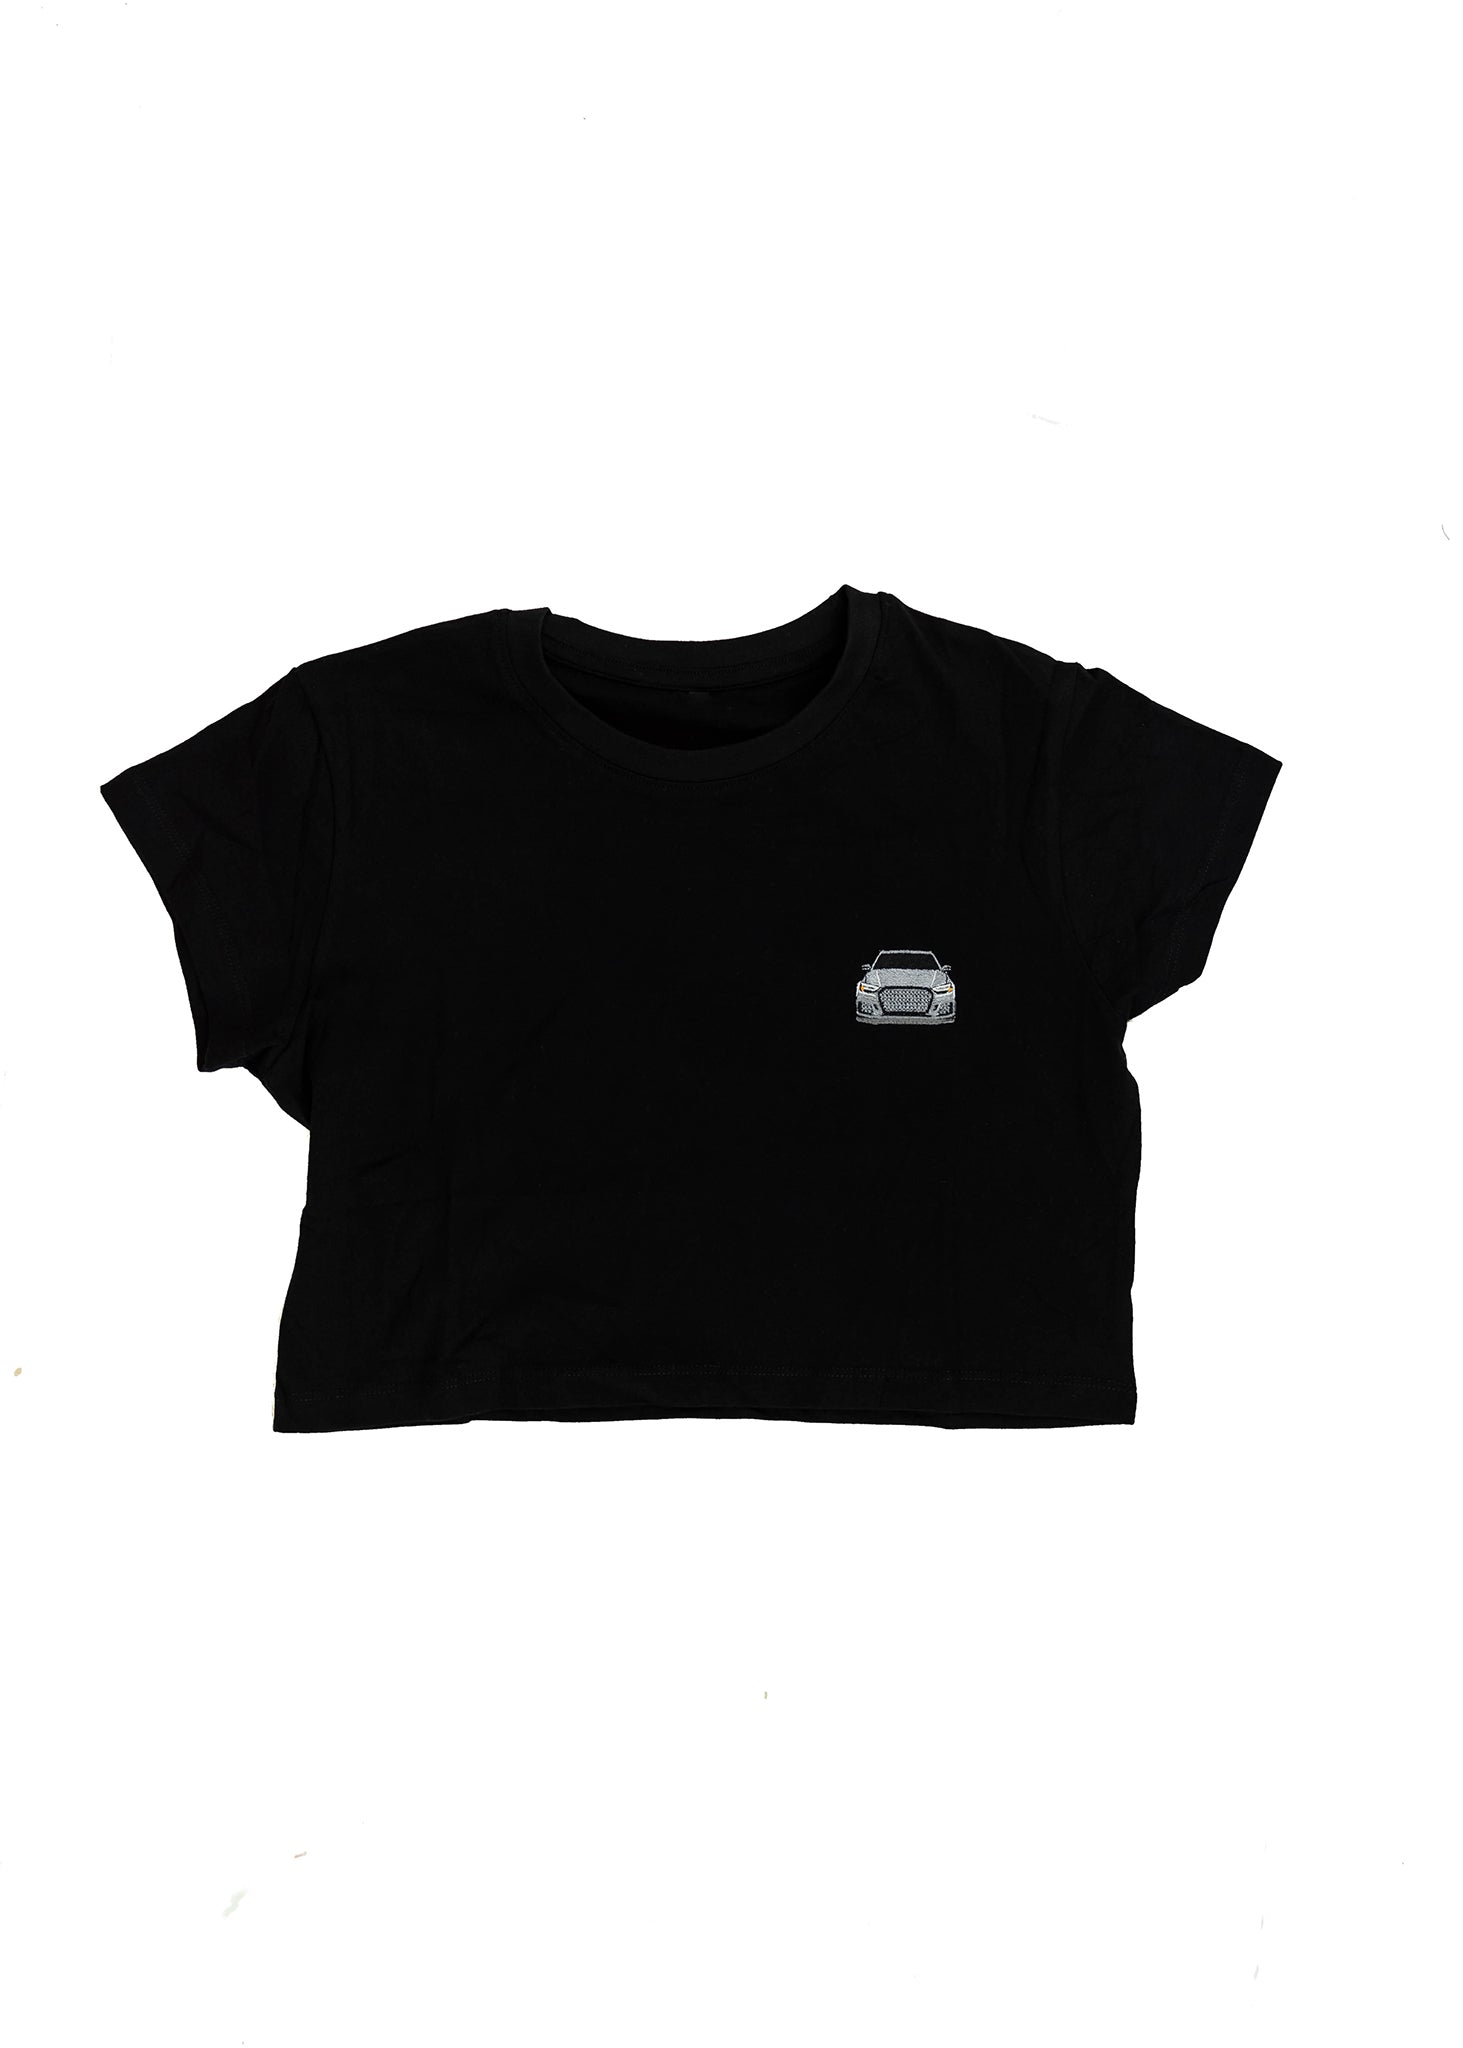 A black women's high quality cropped t-shirt. Full size front view of the black shirt with a nardo grey embroidered 8V RS3. Fabric composition of this tee is 100% cotton. The material is very soft, stretchy, and non-transparent. The style of this tshirt is a crewneck, short sleeve, cropped at the waist, with embroidery on the left chest.